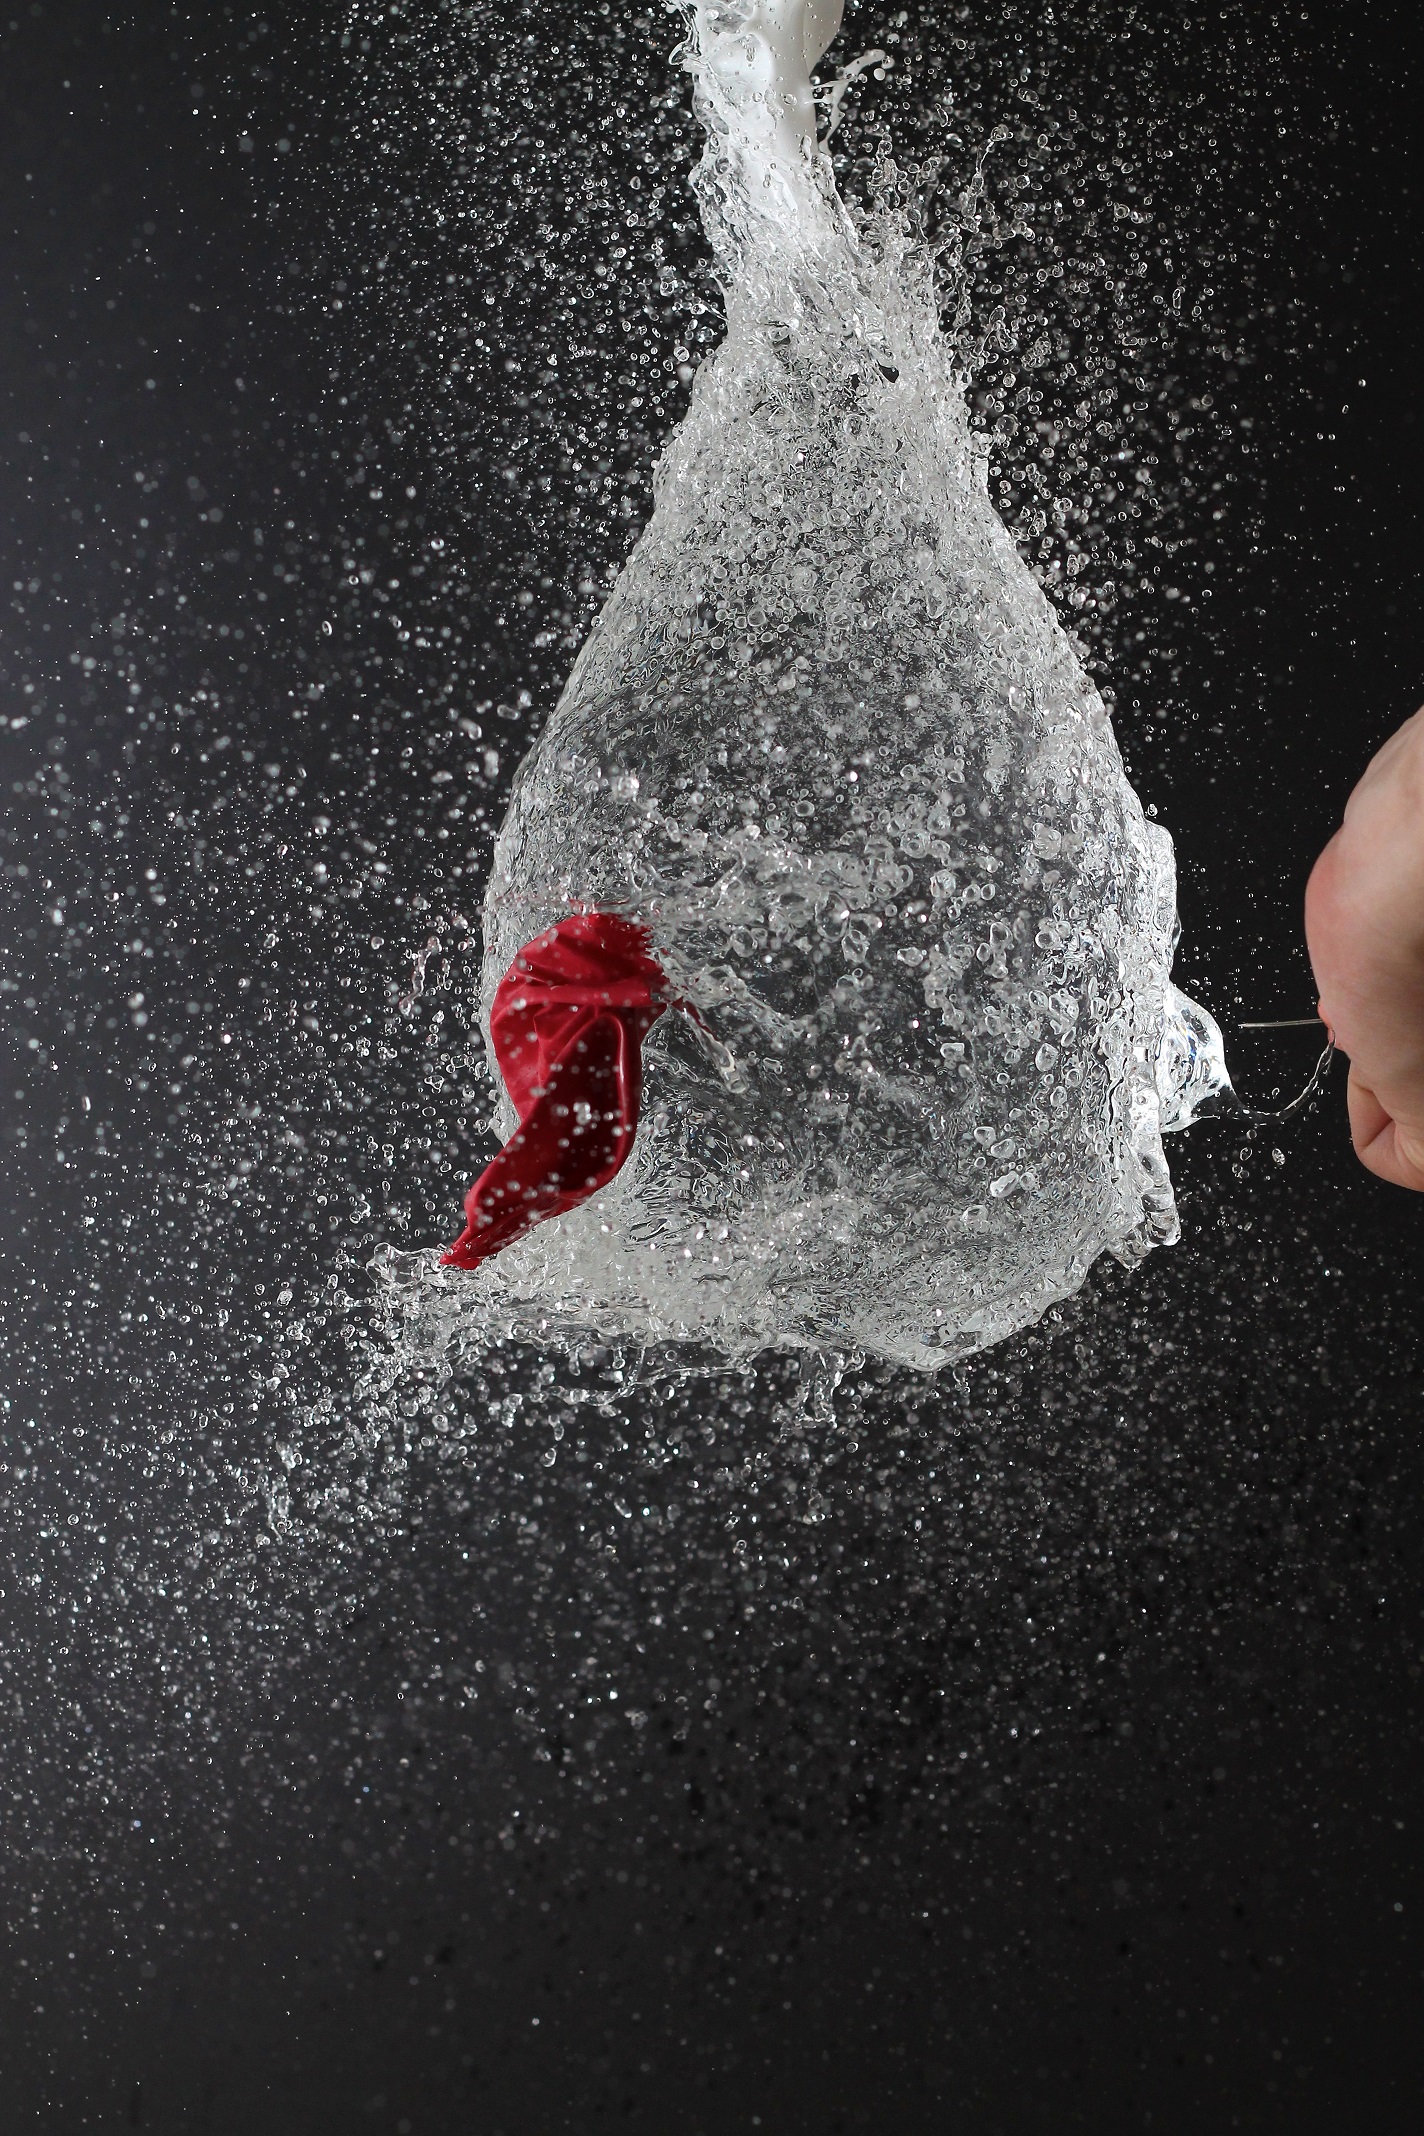 artificial intelligence - Water balloon being punctured in slow motion